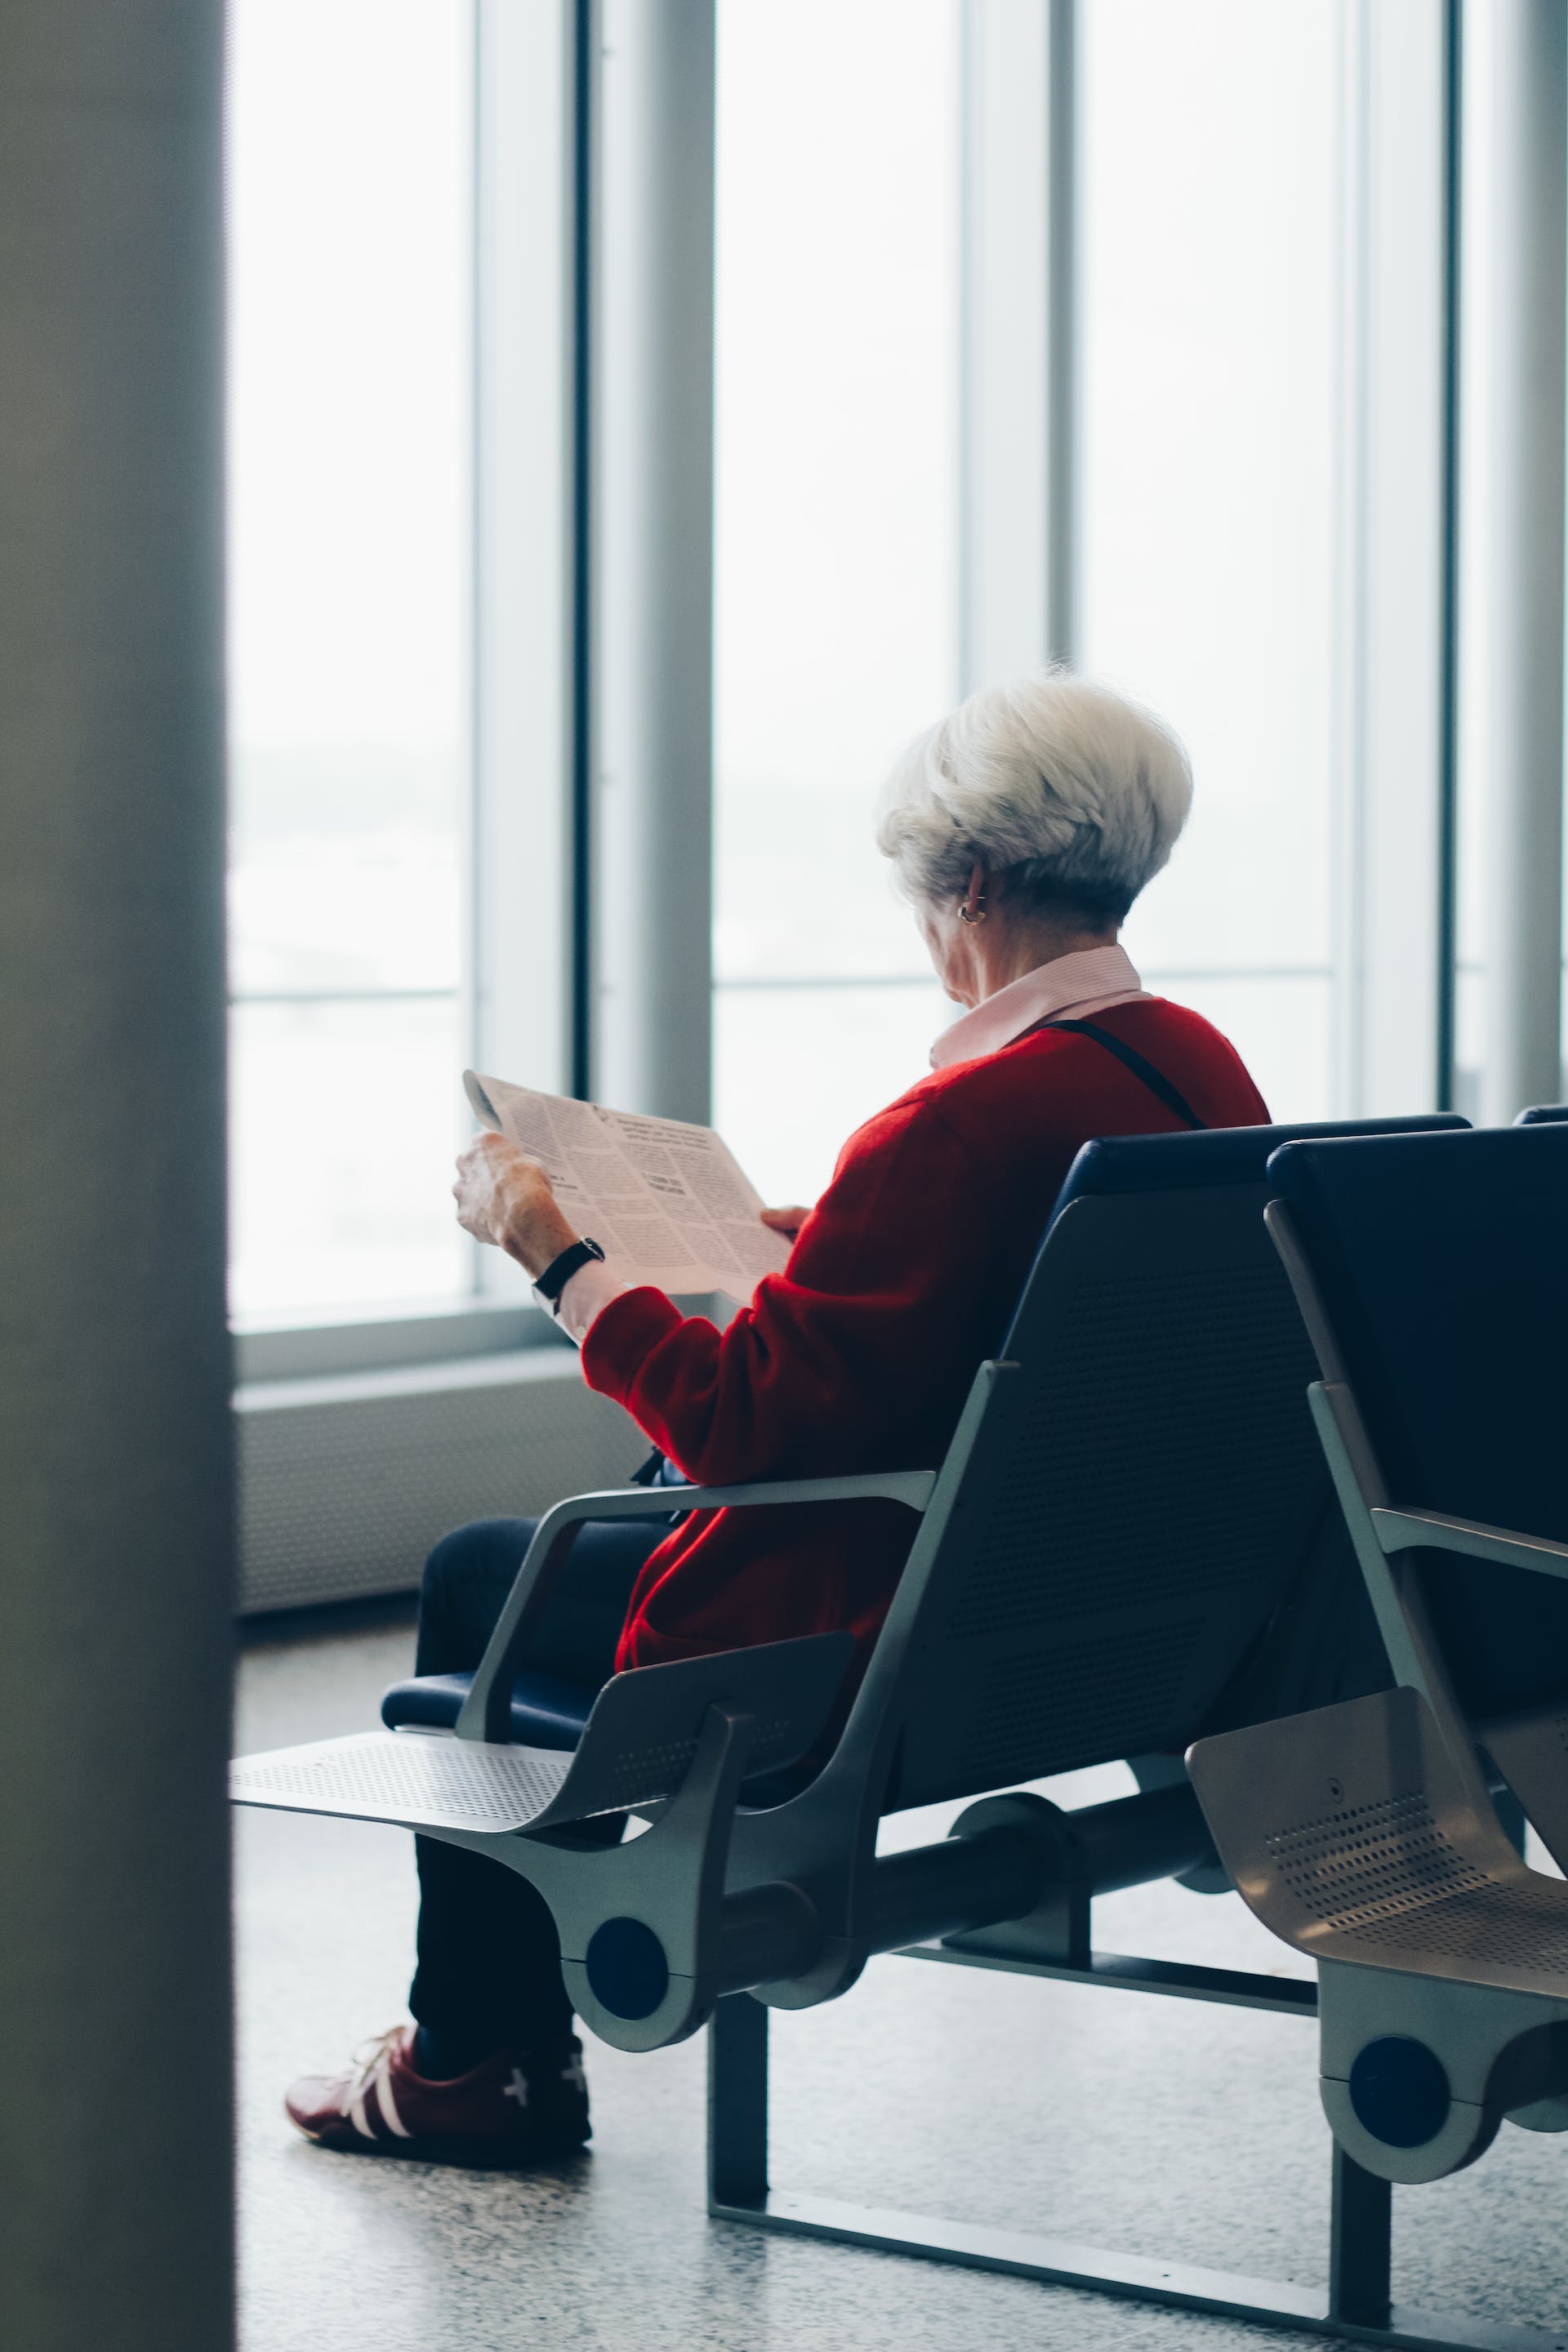 An older woman sitting on a chair | Source: Pexels